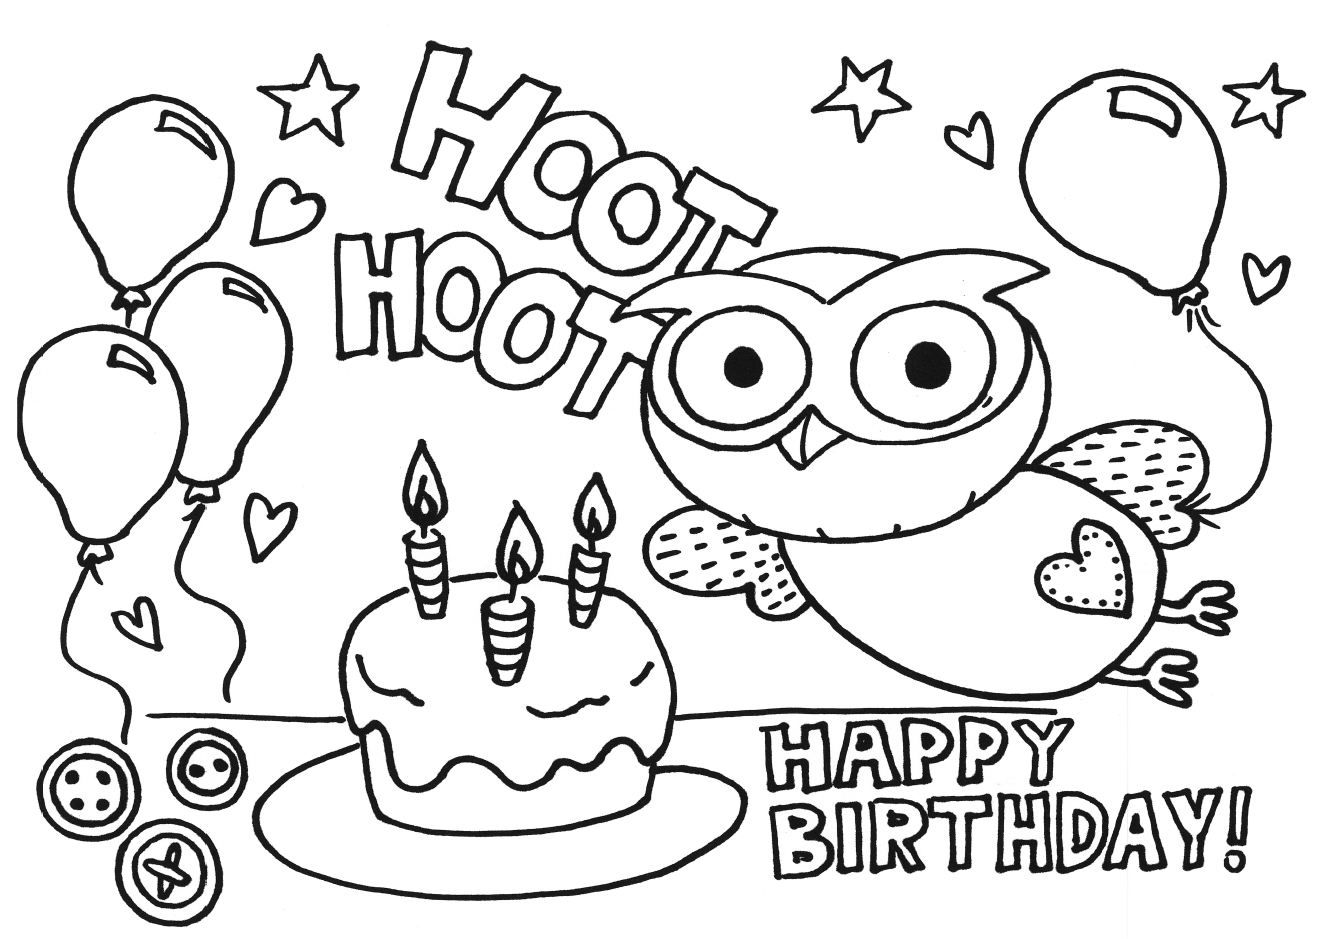 Printable Happy Birthday Coloring Pages - Colorine.net | #18248